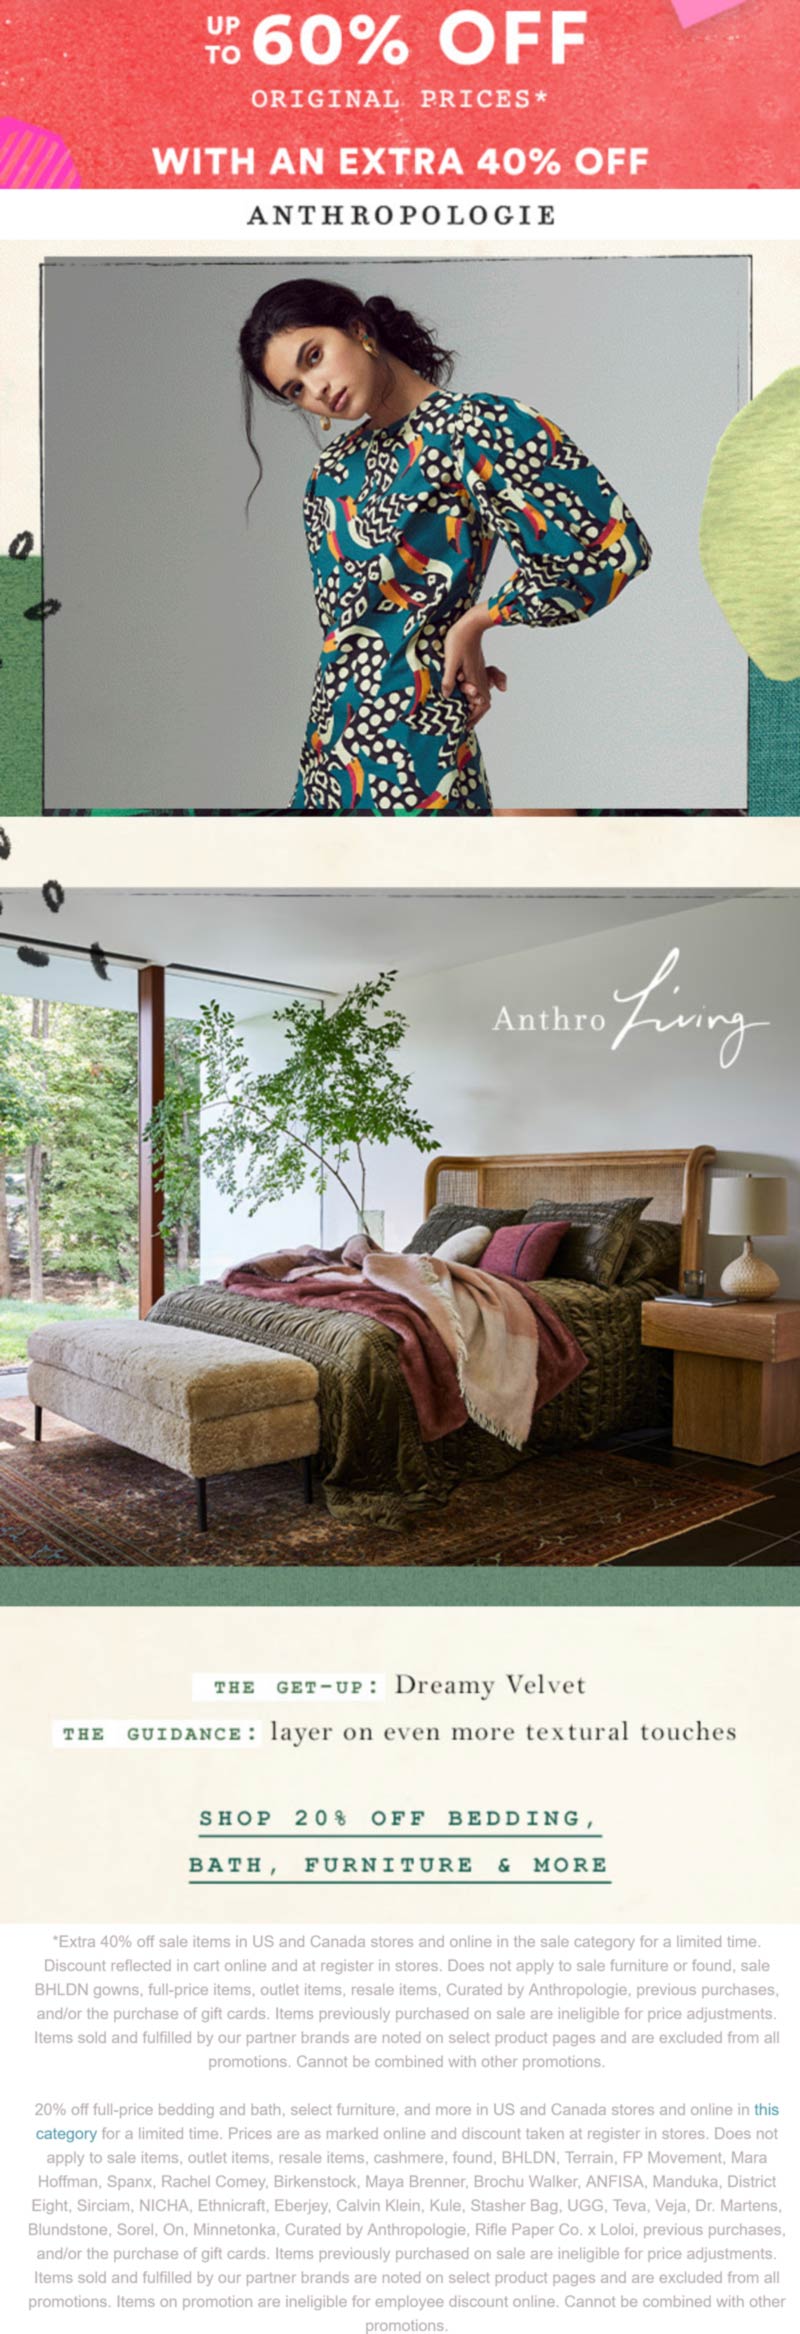 Anthropologie stores Coupon  Extra 40% off sale items & more at Anthropologie, ditto online #anthropologie 